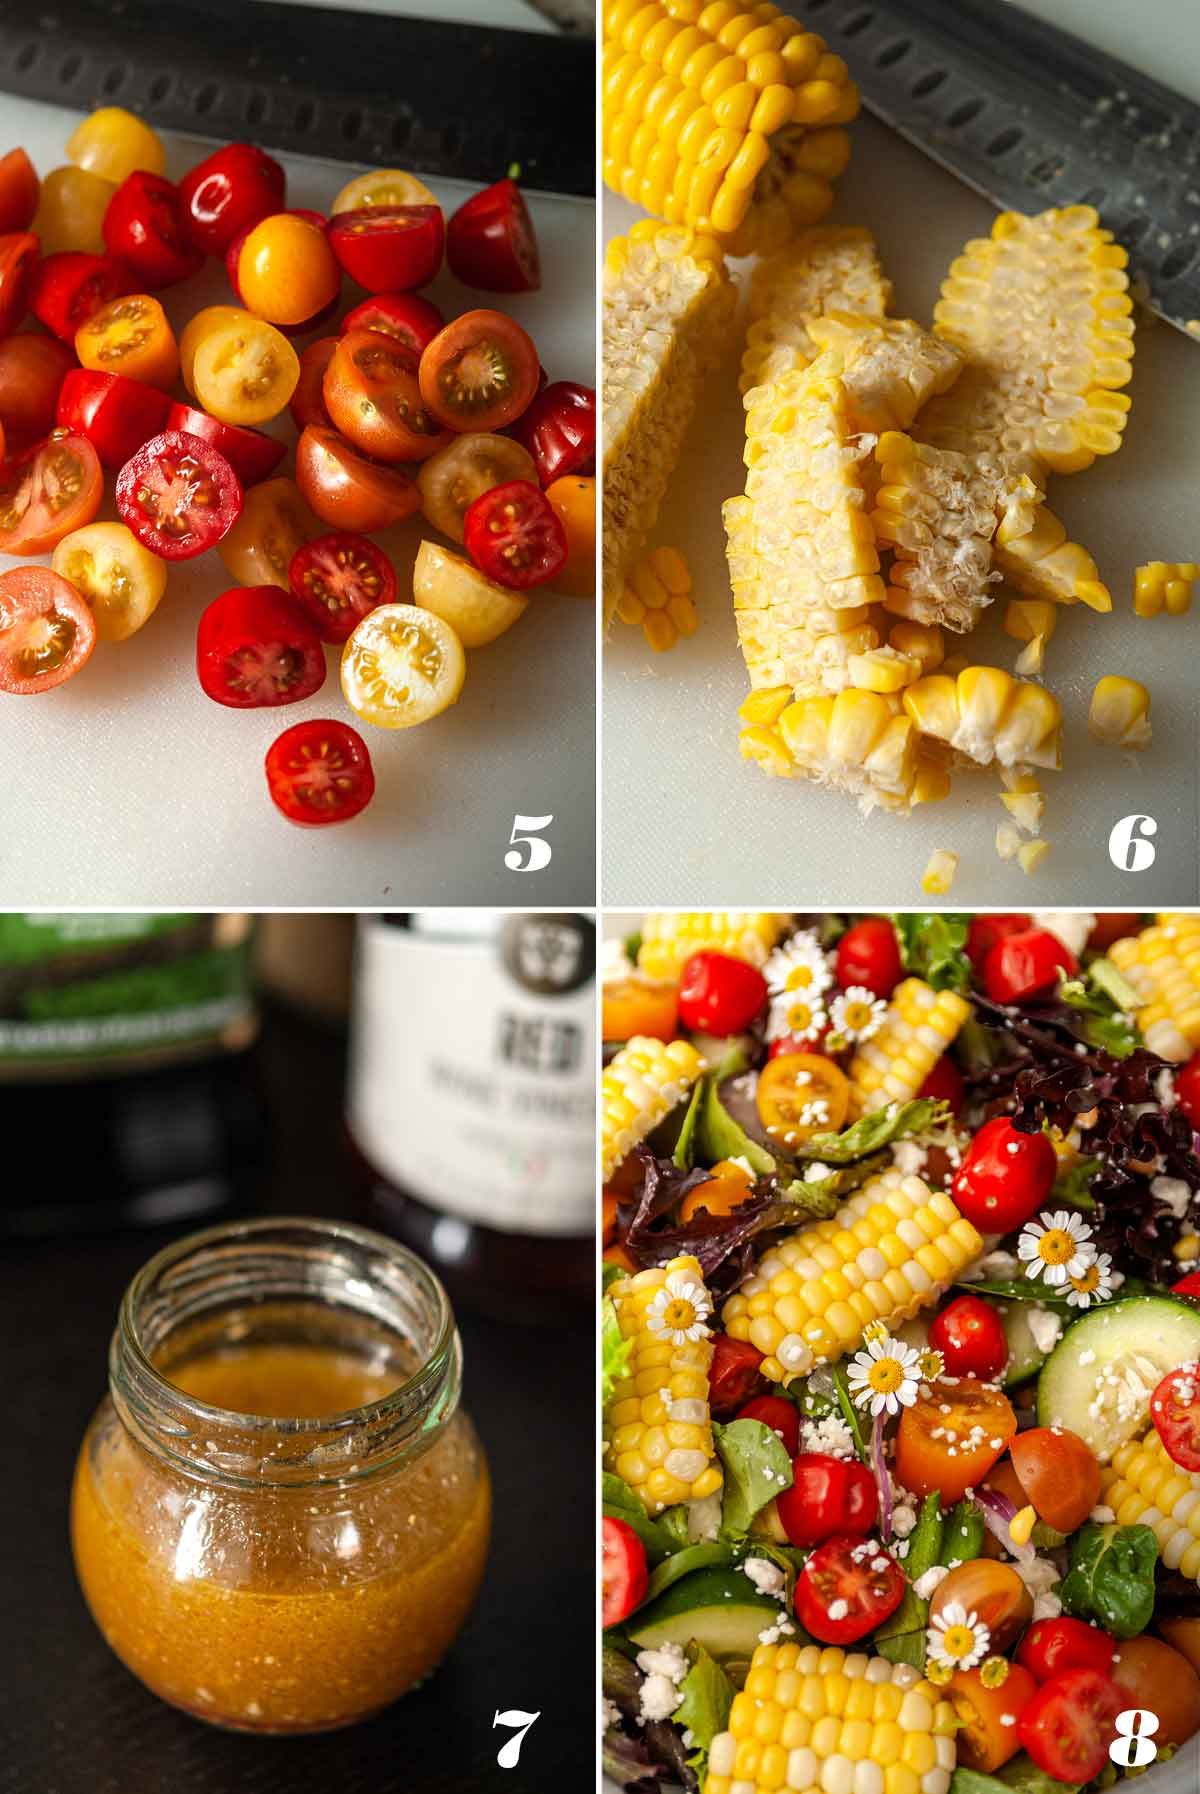 A collage of 4 numbered images showing how to make summer corn salad.